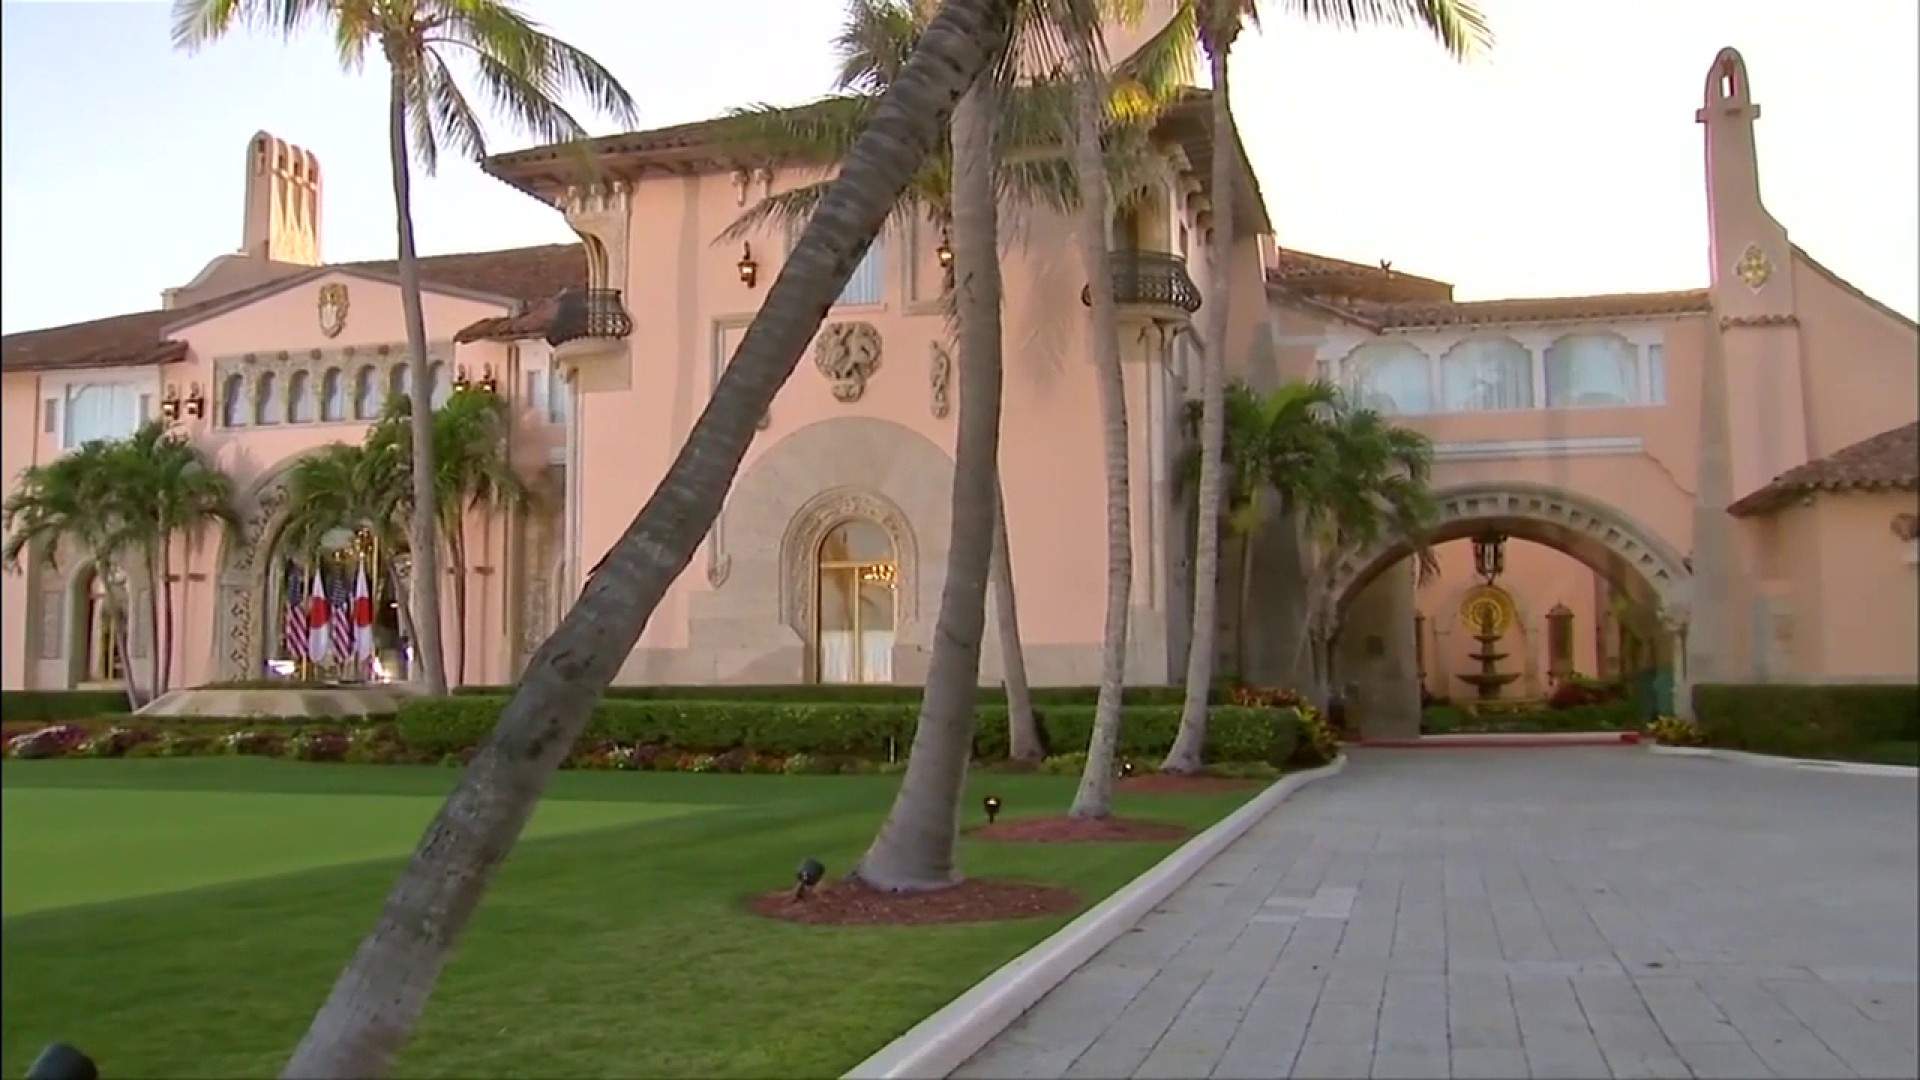 Trump’s Mar-a-Lago partially closed because of COVID outbreak, reports say